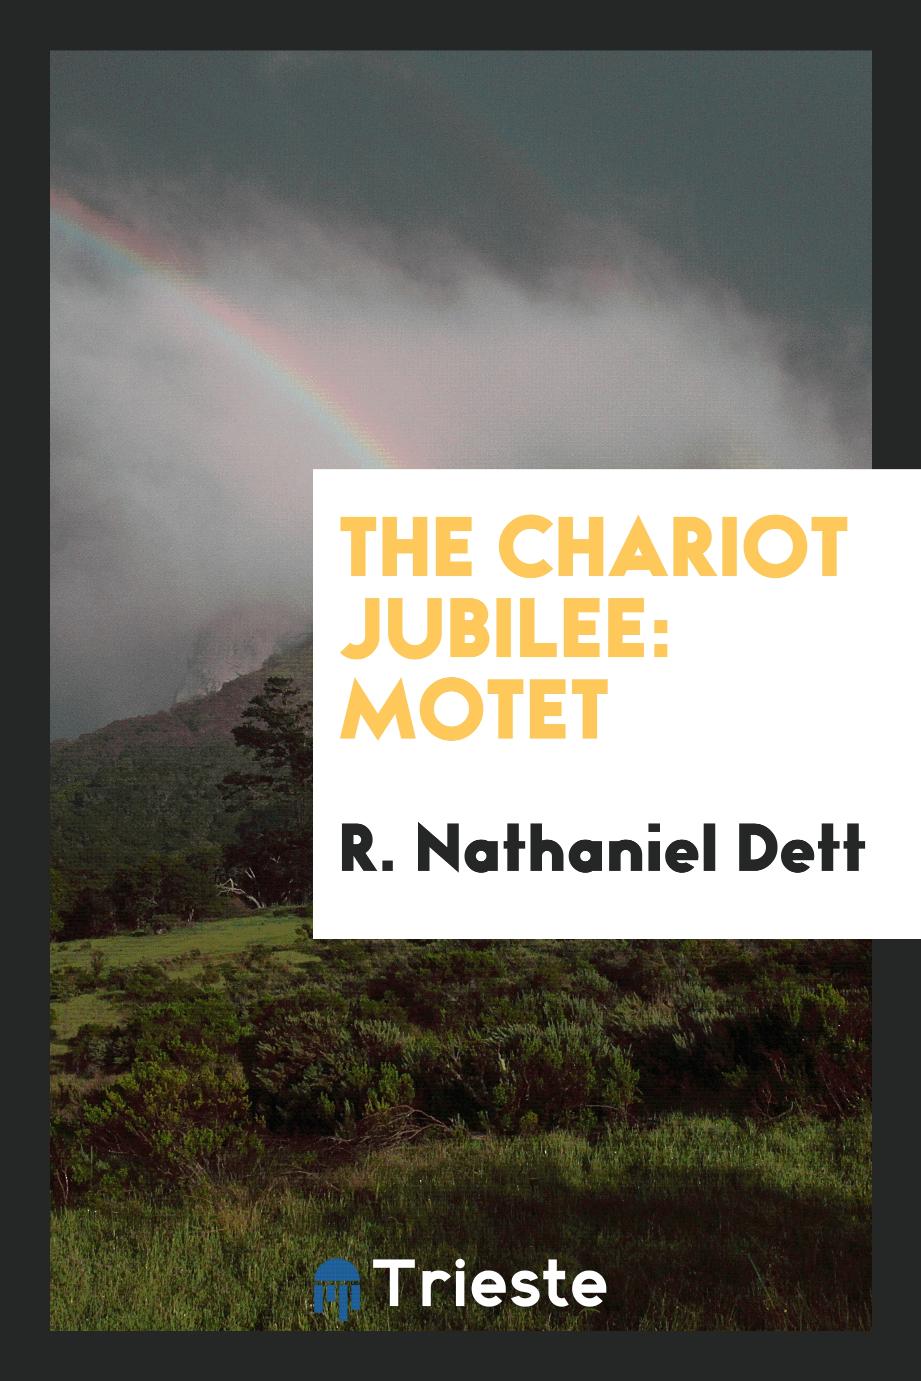 The Chariot Jubilee: Motet